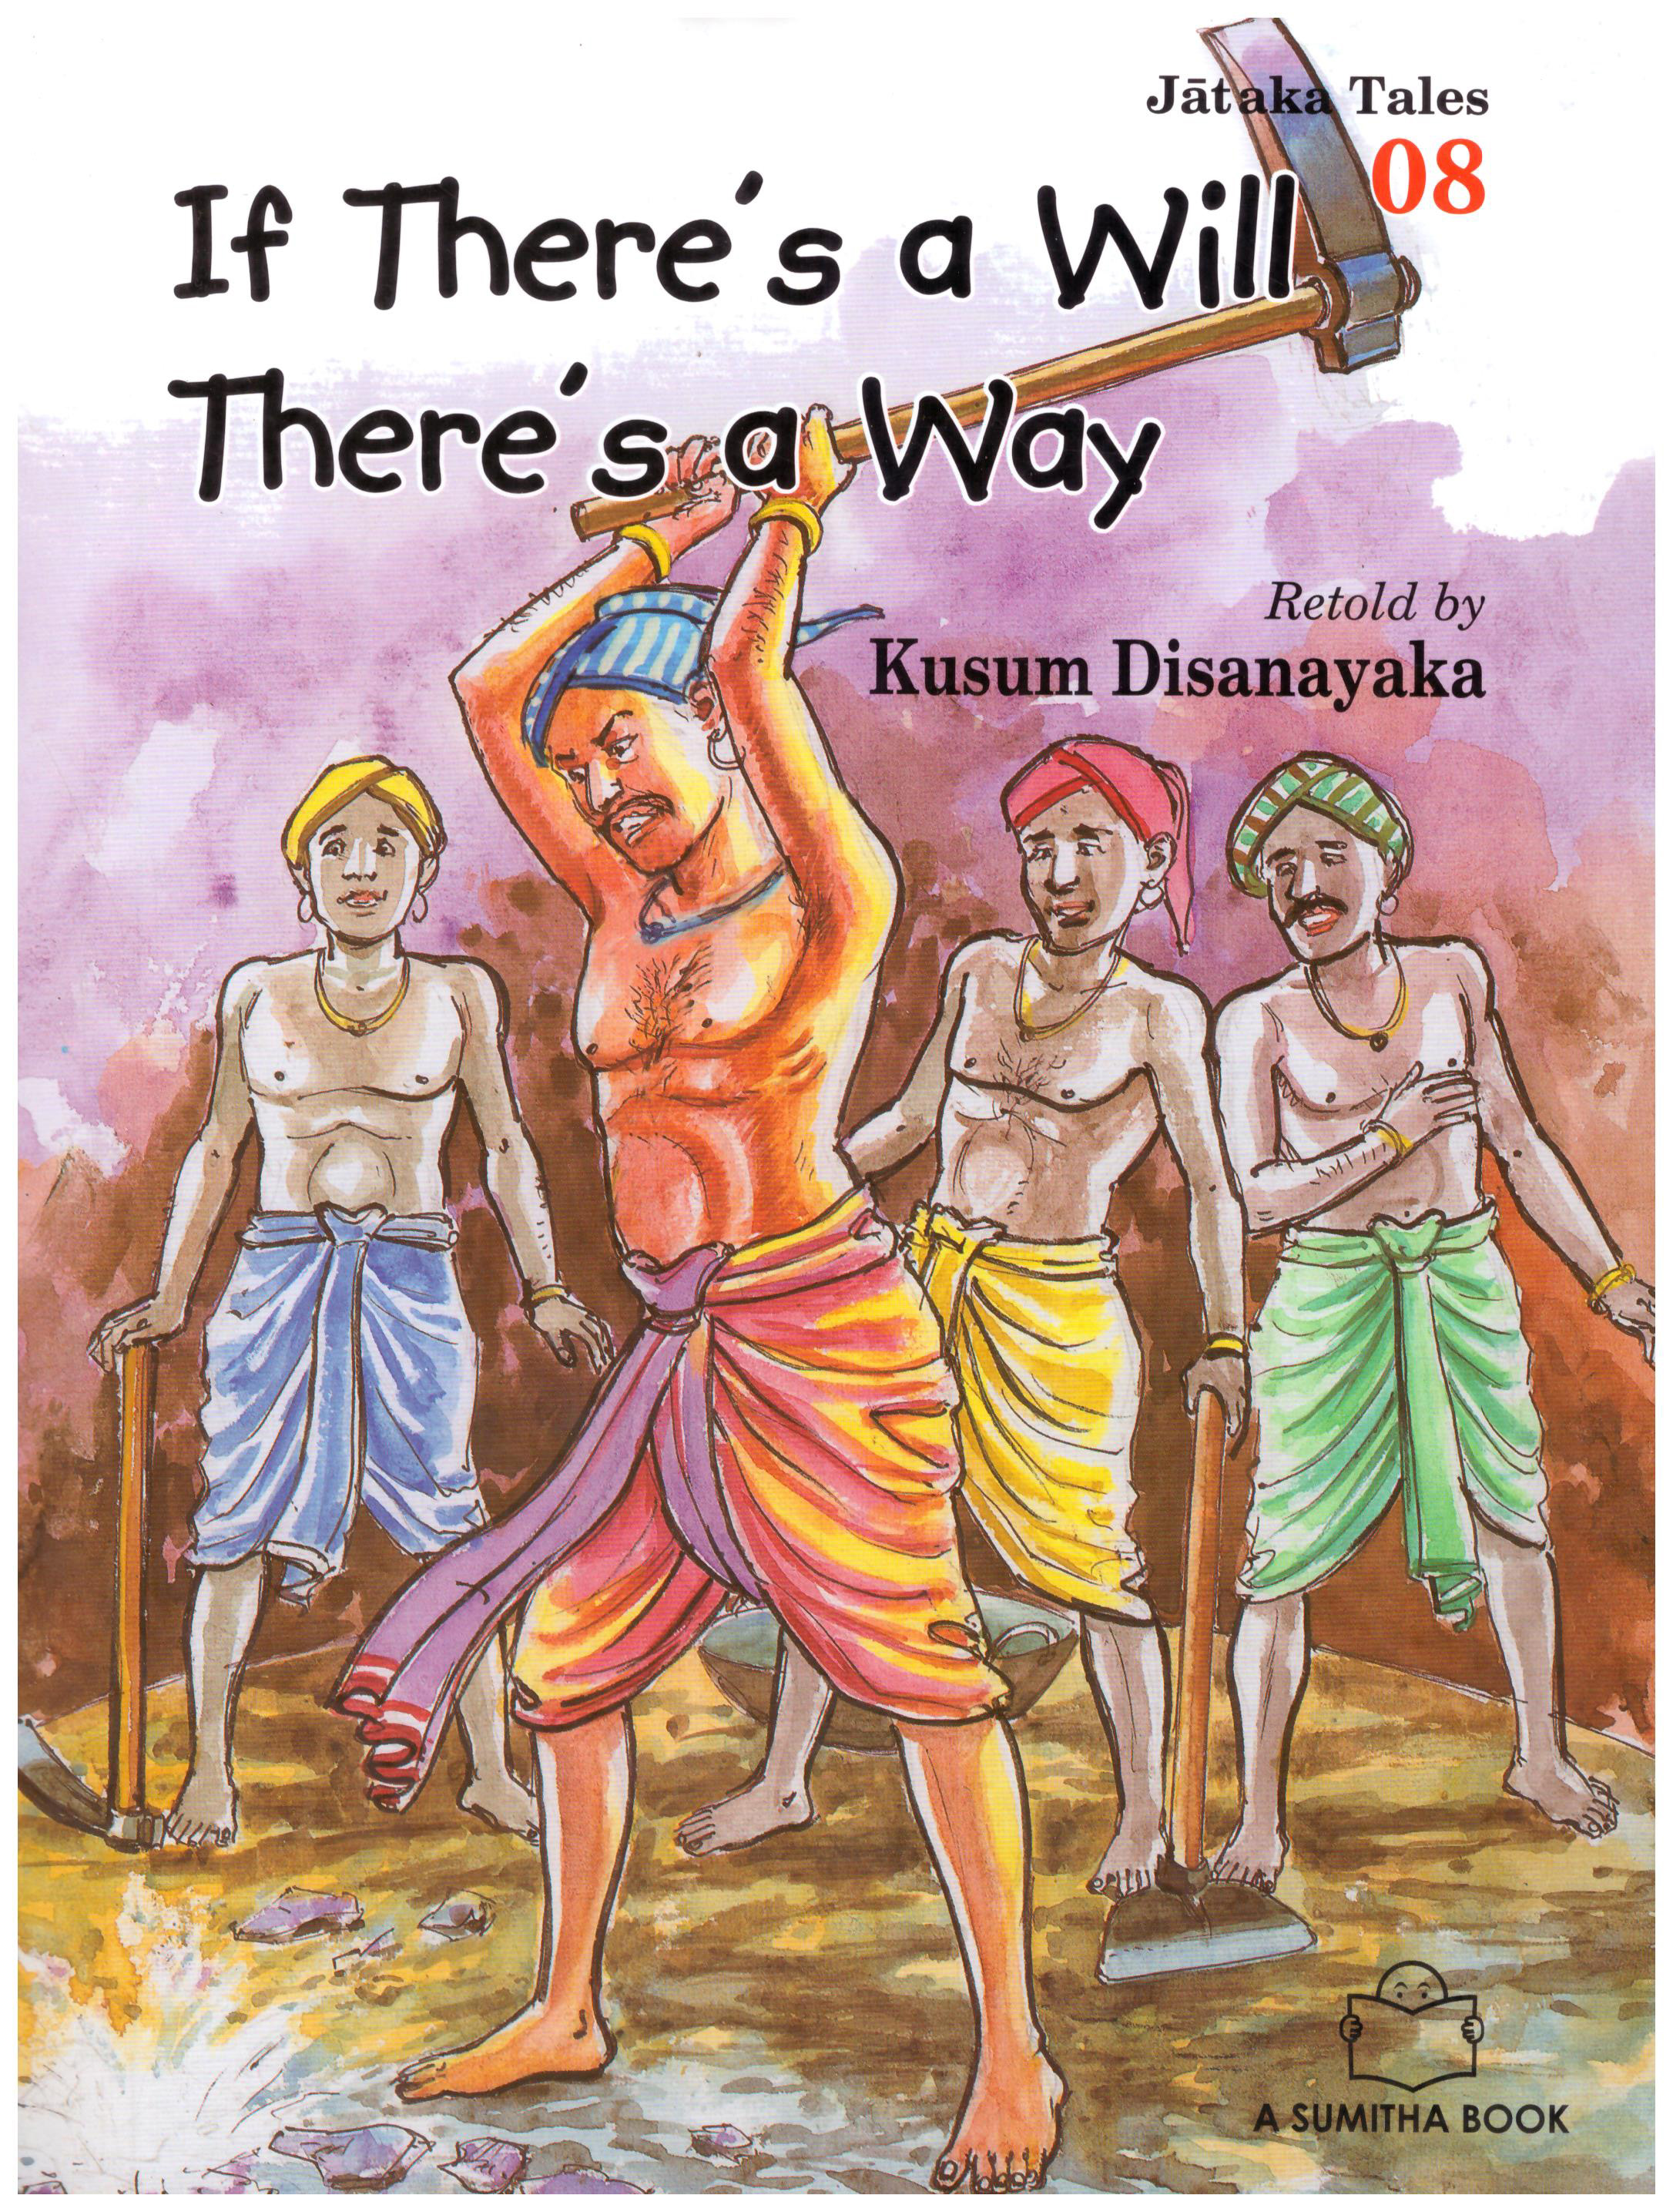 Jataka Tales 08 - If There's a Will There's a Way